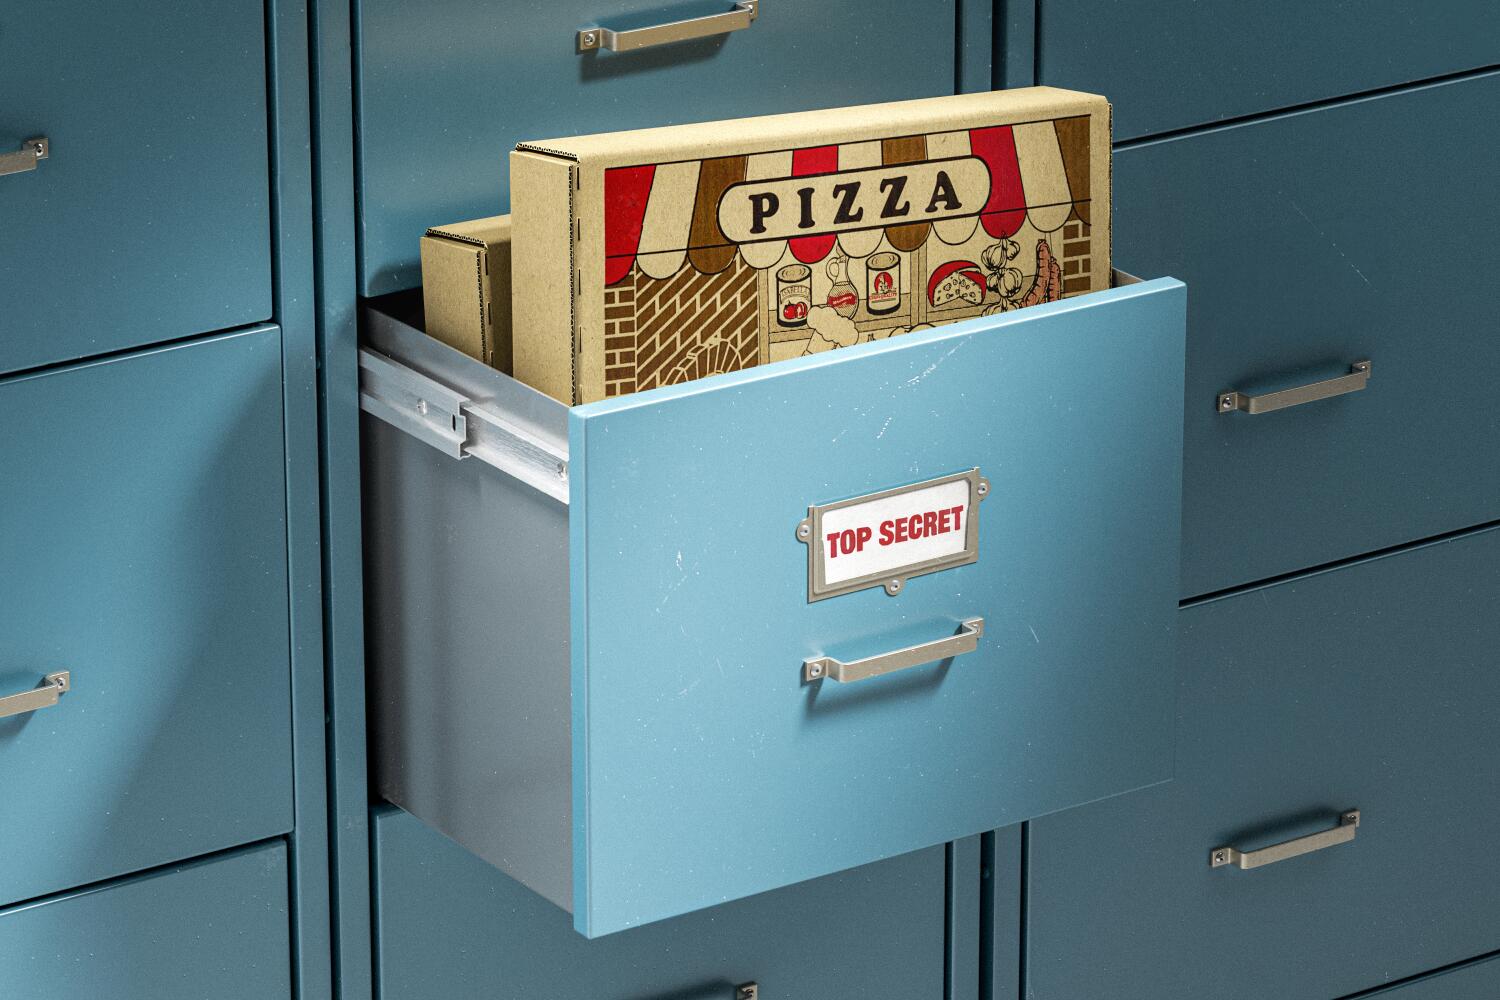 People are obsessed with this weird pizza box. The company behind it won't discuss it